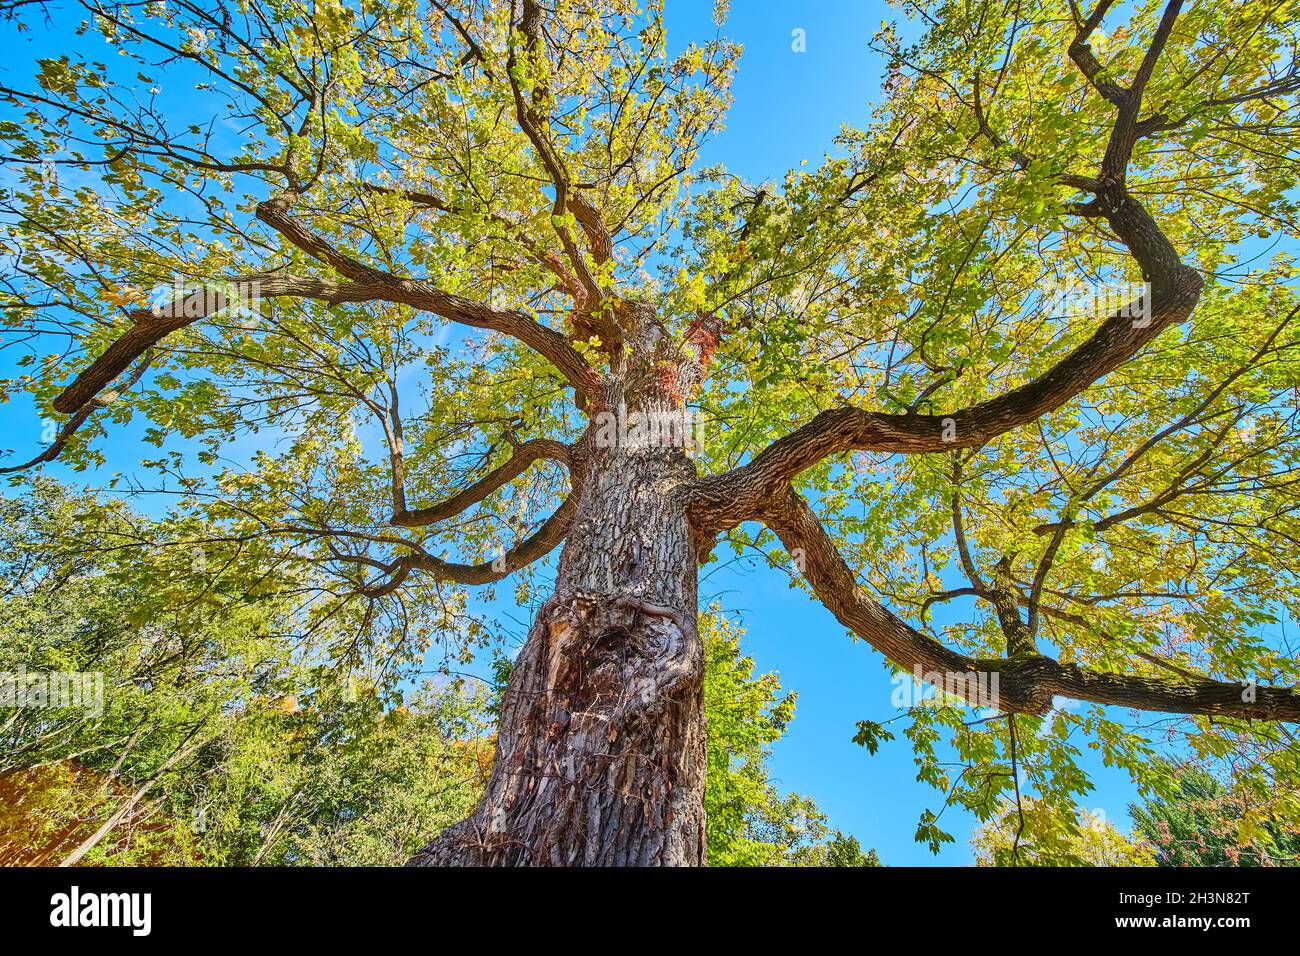 Looking up at large ancient tree with thick bark Stock Photo